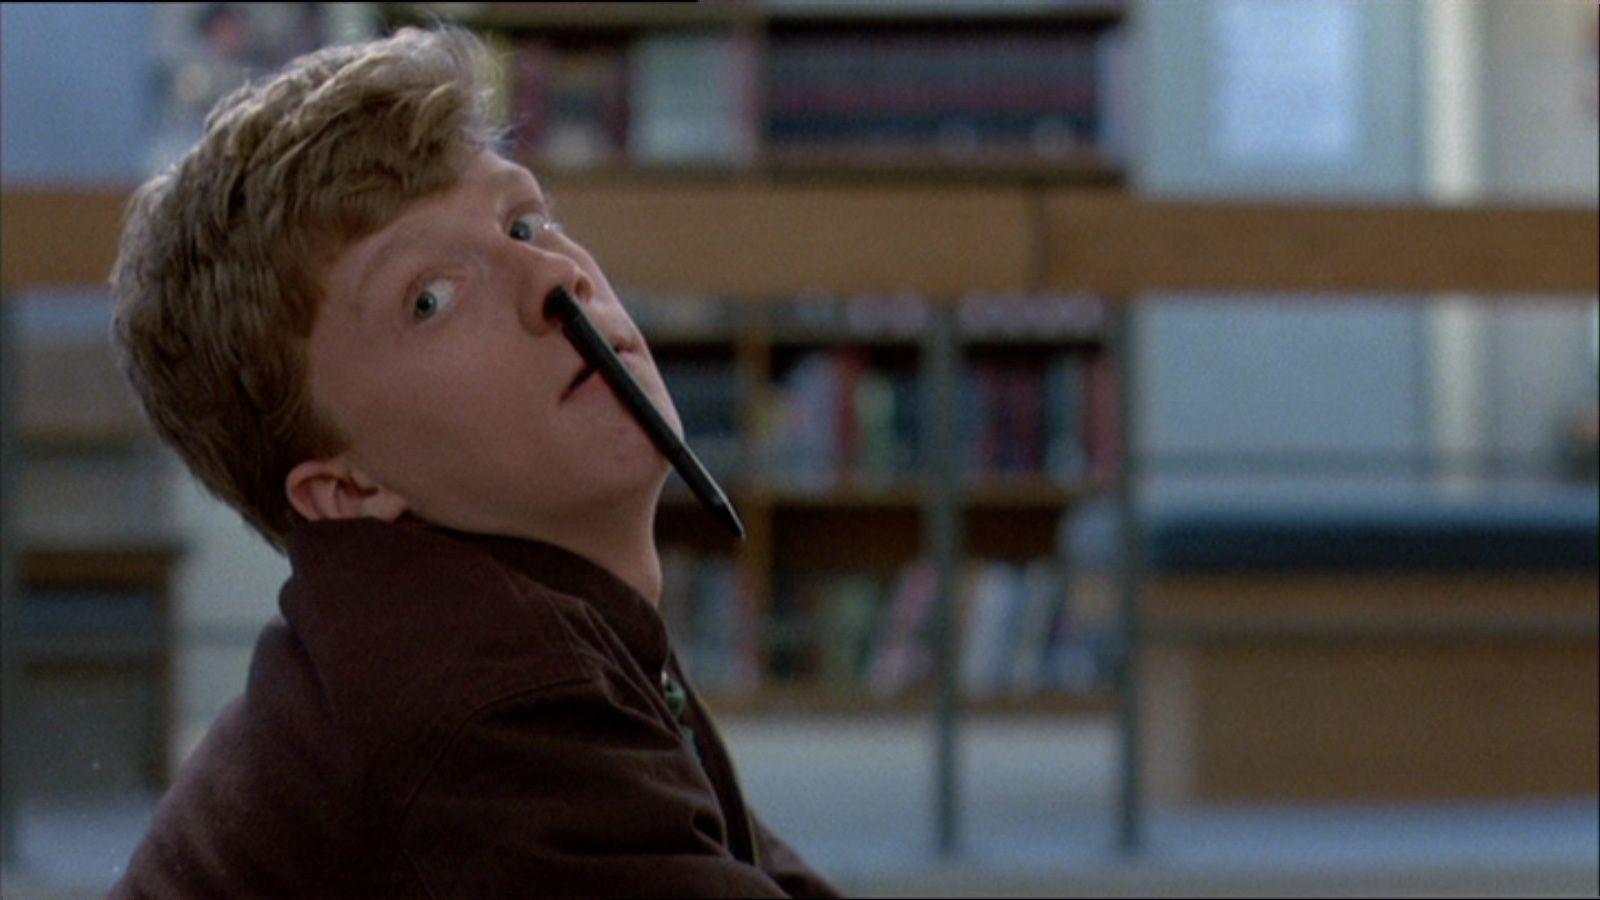 Life Lessons We Learned from 'The Breakfast Club'